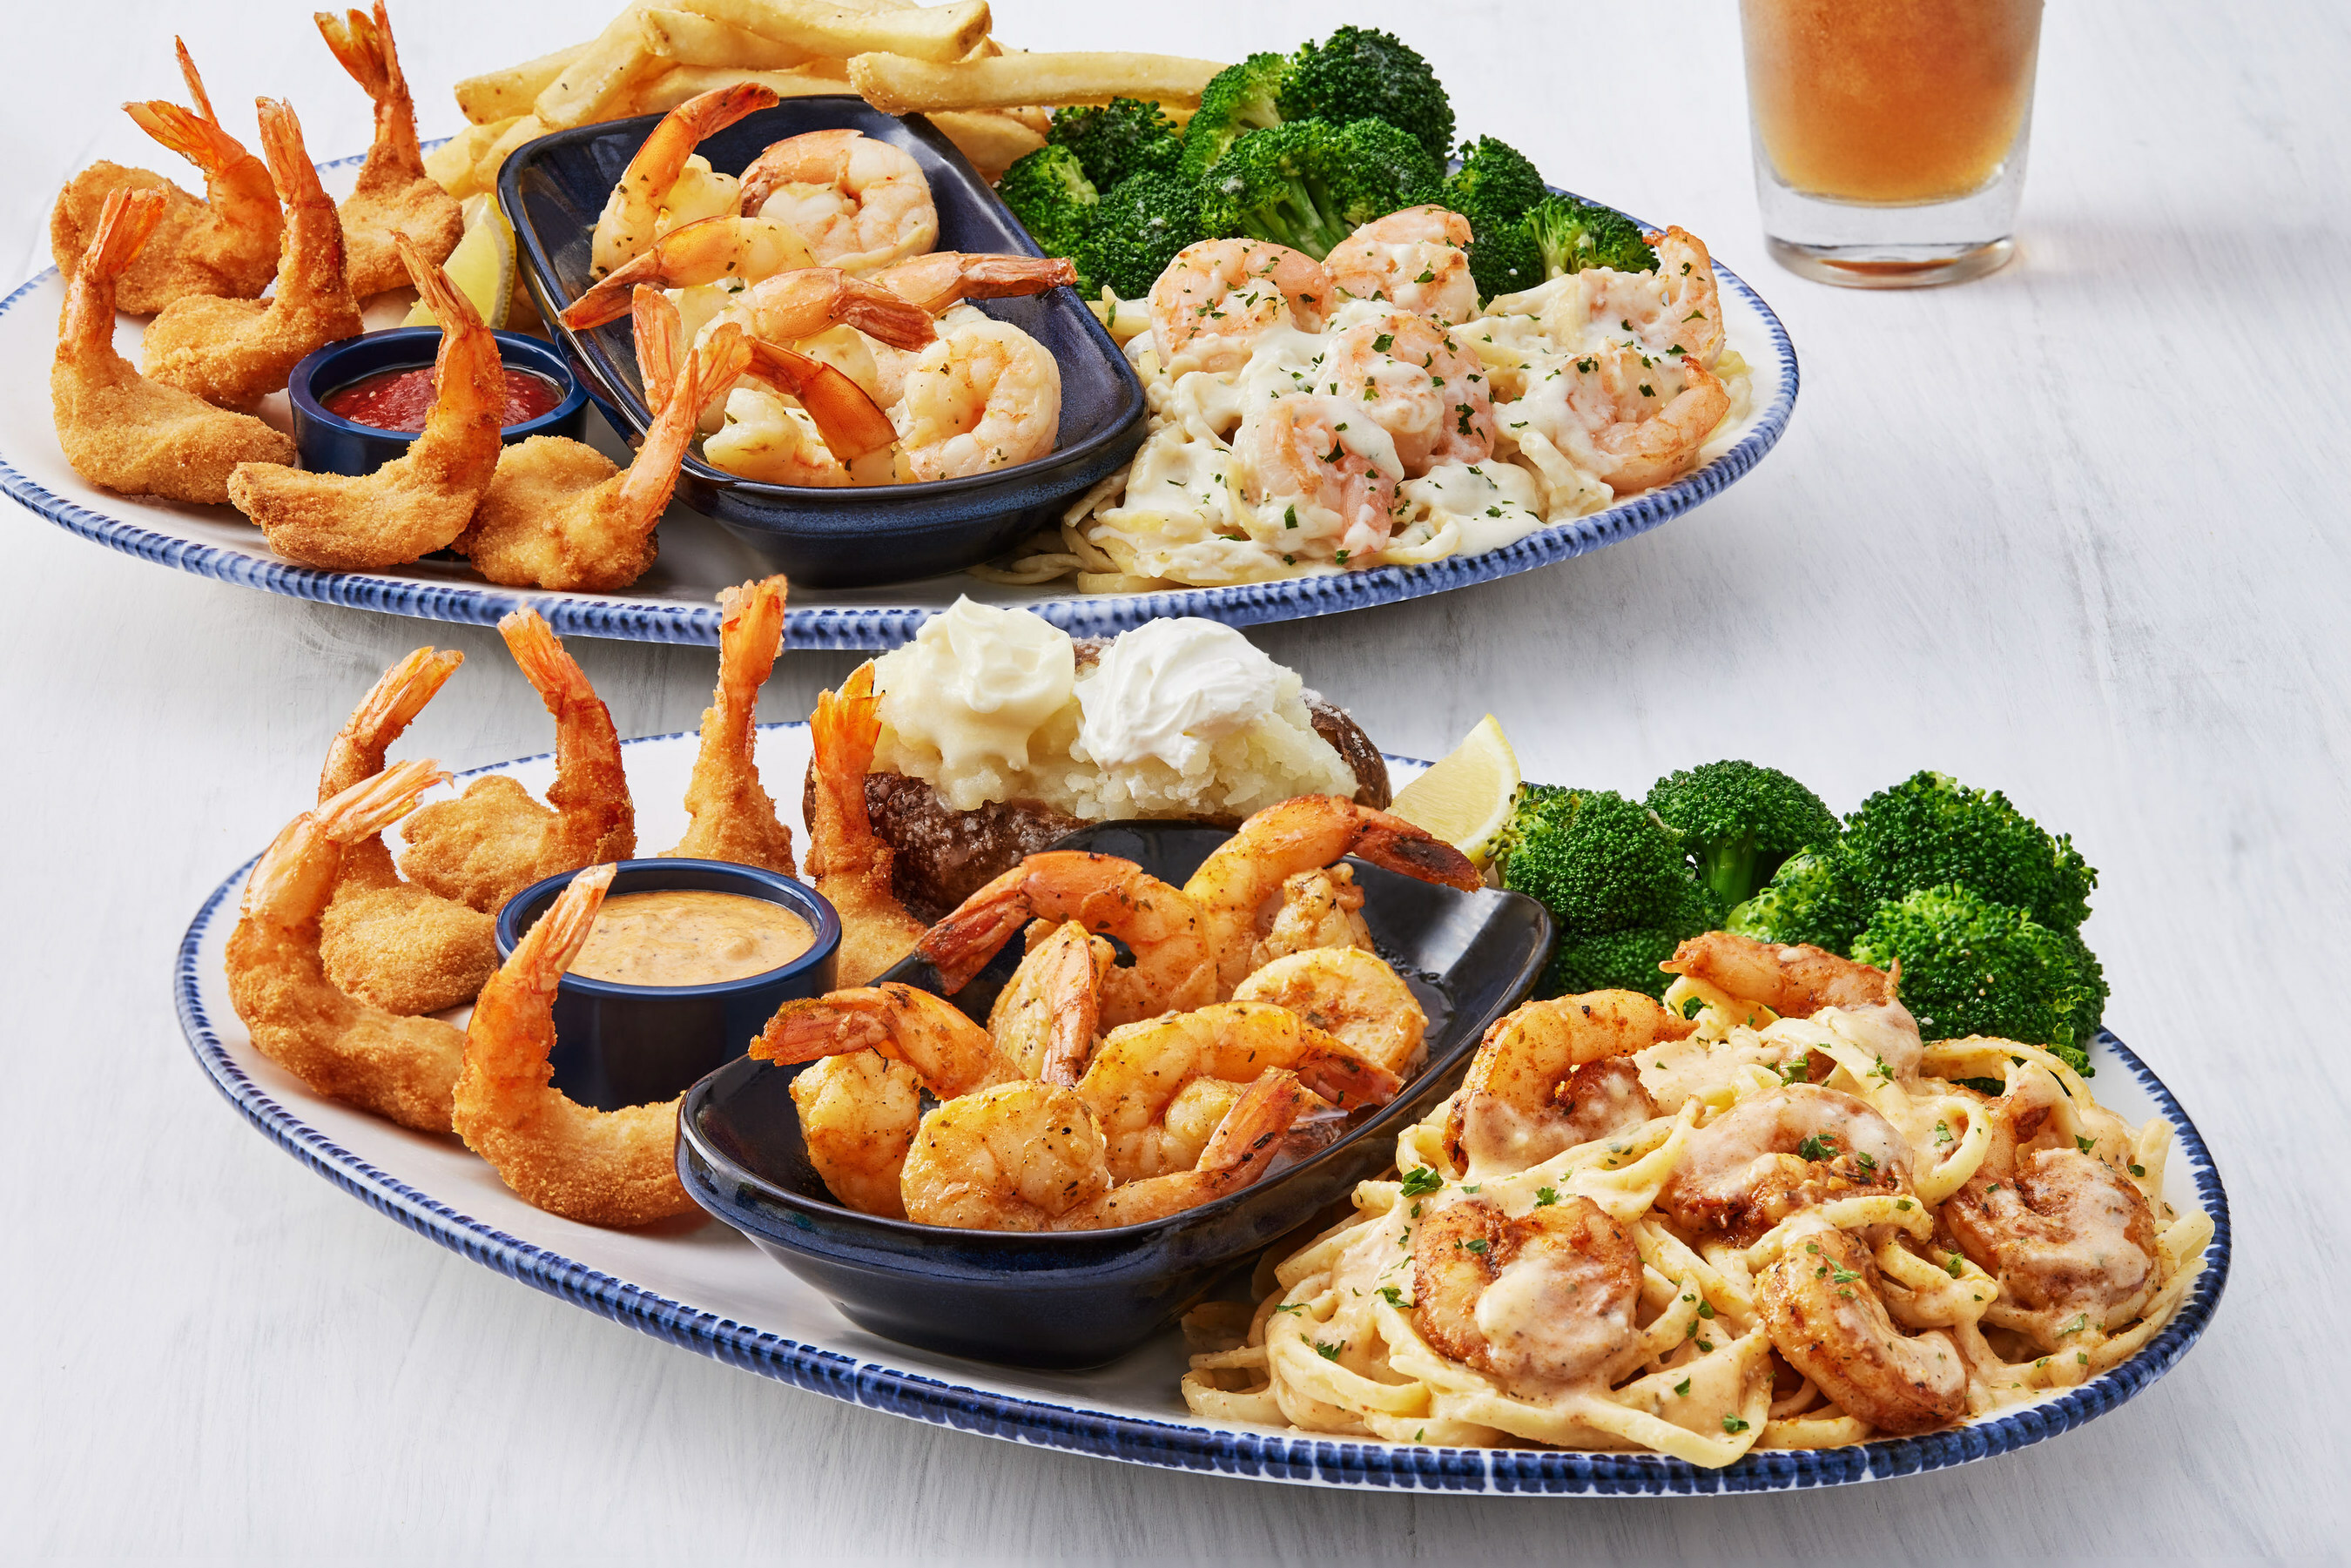 Red Lobster Launches Shrimp Trios, Begins Month-Long Make-A-Wish Fundraiser